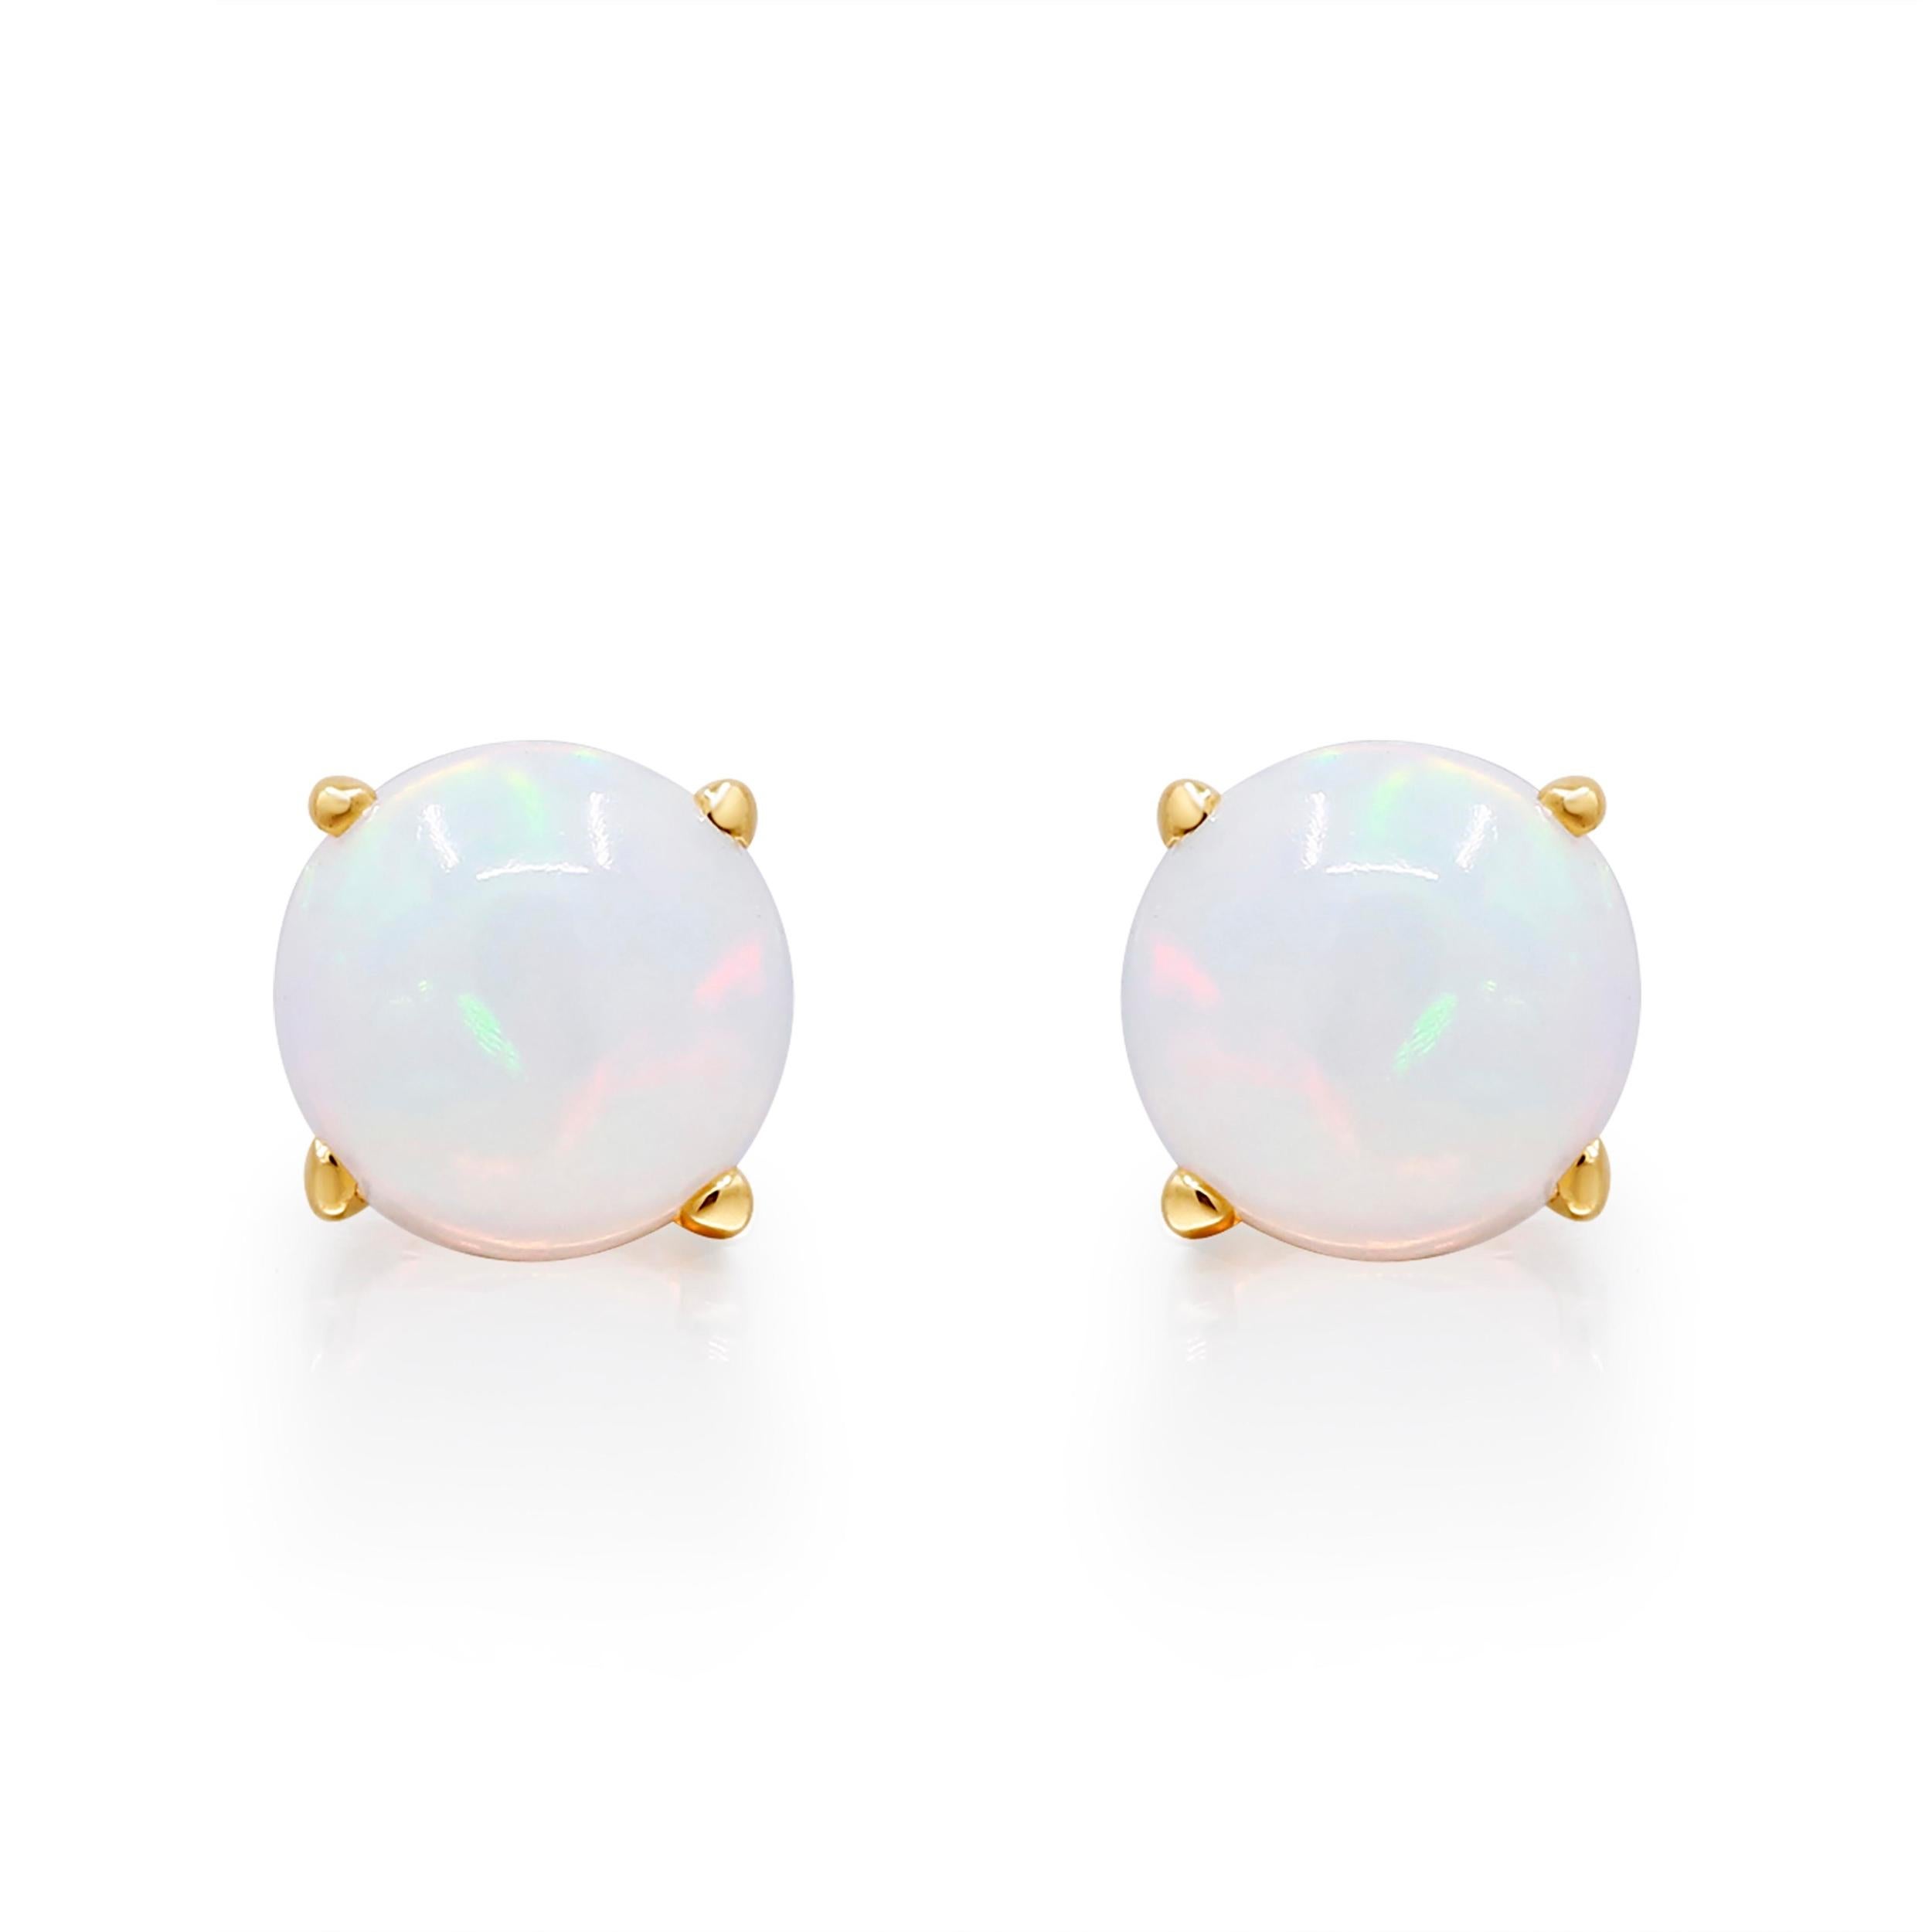 Round Cut 1.22 Carat Round-Cut Ethiopian Opal 14K Yellow Gold Stud Earrings For Sale